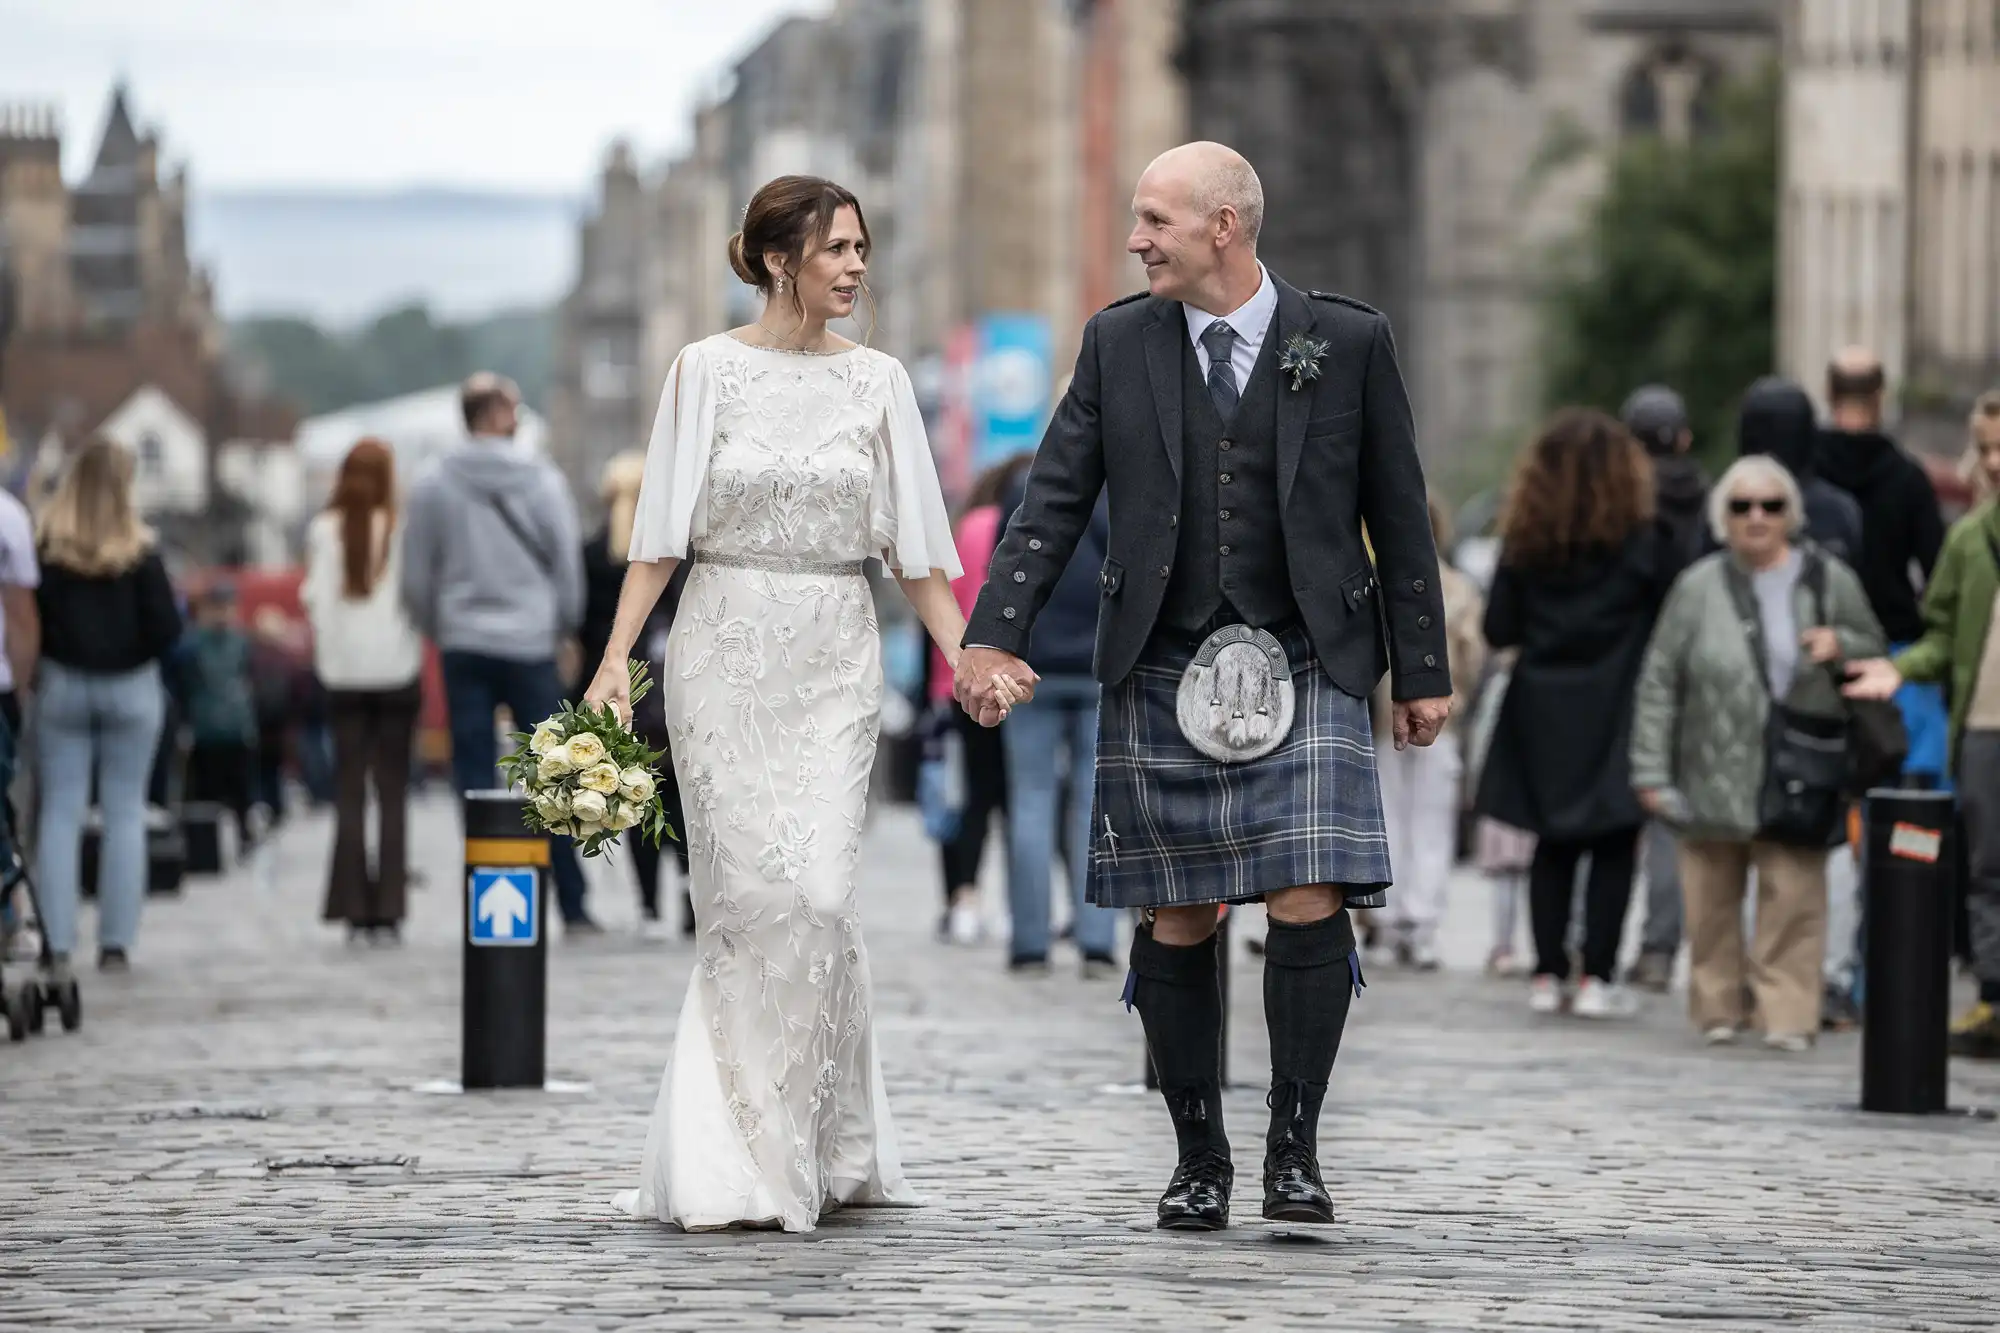 A couple, dressed in wedding attire, holds hands while walking down a cobblestone street surrounded by people. The man wears a kilt, and the woman carries a bouquet.